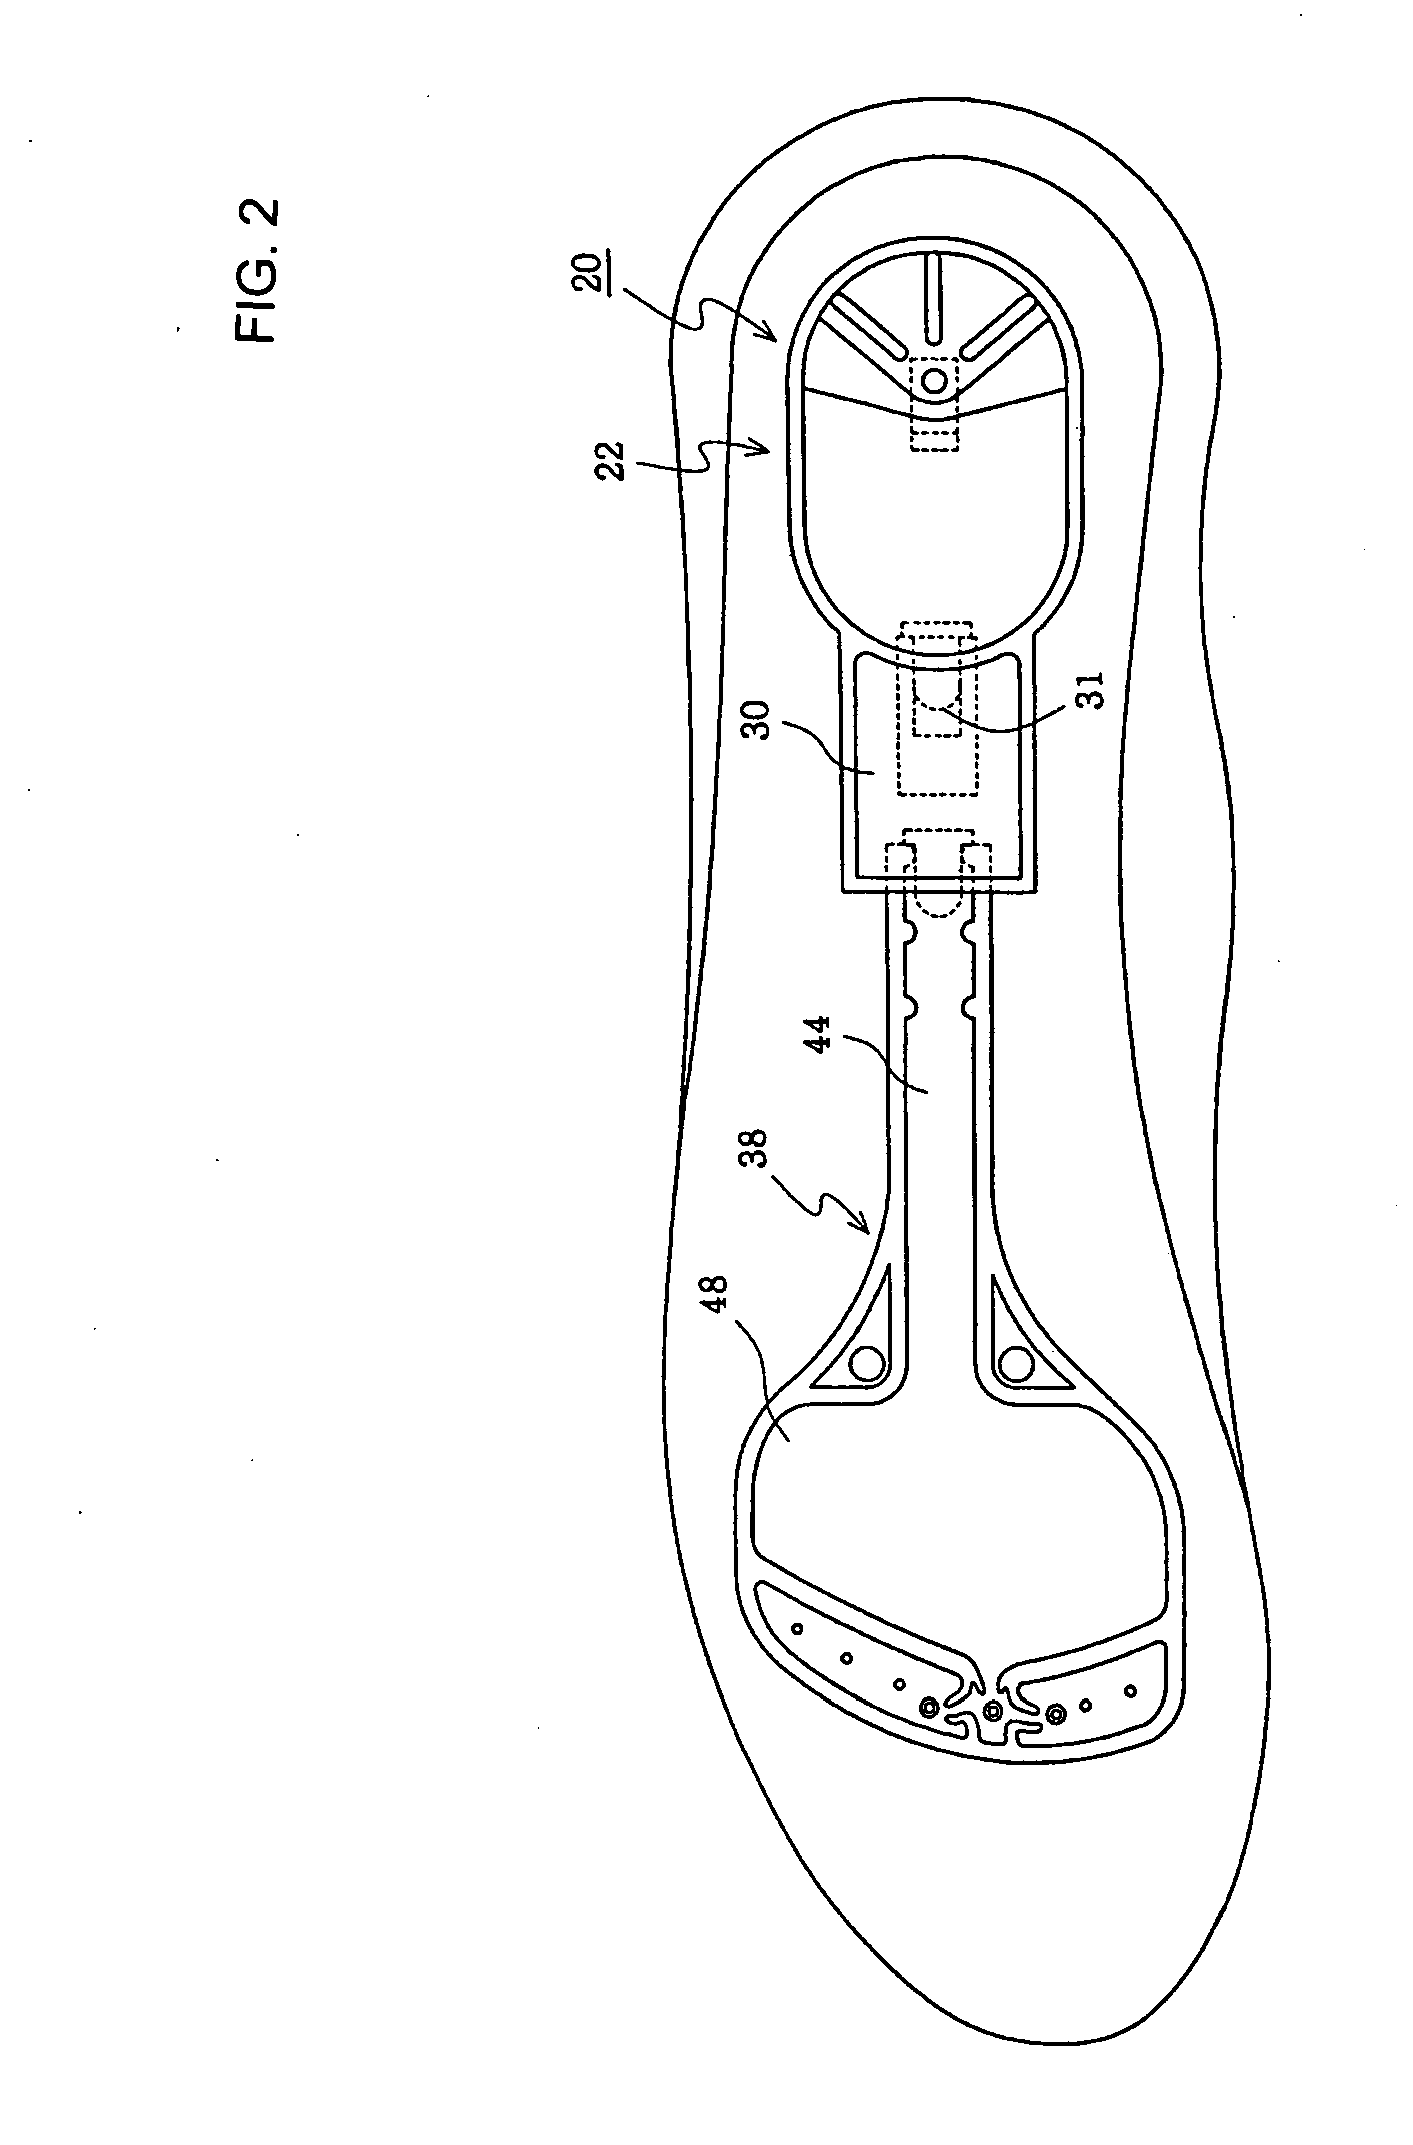 Shoe with cushion and ventilation device